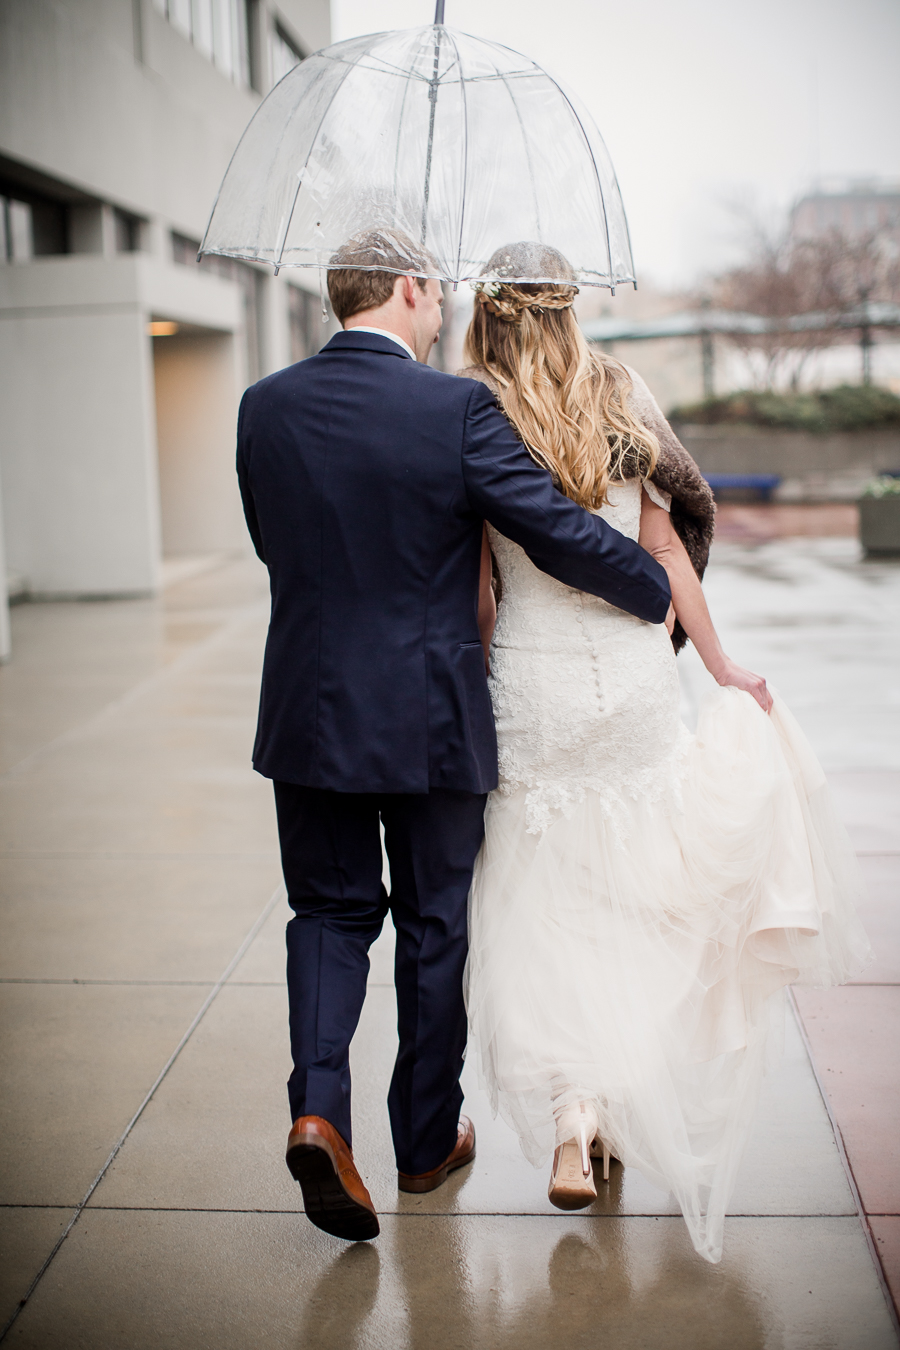 Groom escorting the bride under an umbrella during the bride and groom romantic portraits at this winter wedding at Knoxville Wedding Venue, Jackson Terminal, by Knoxville Wedding Photographer, Amanda May Photos.